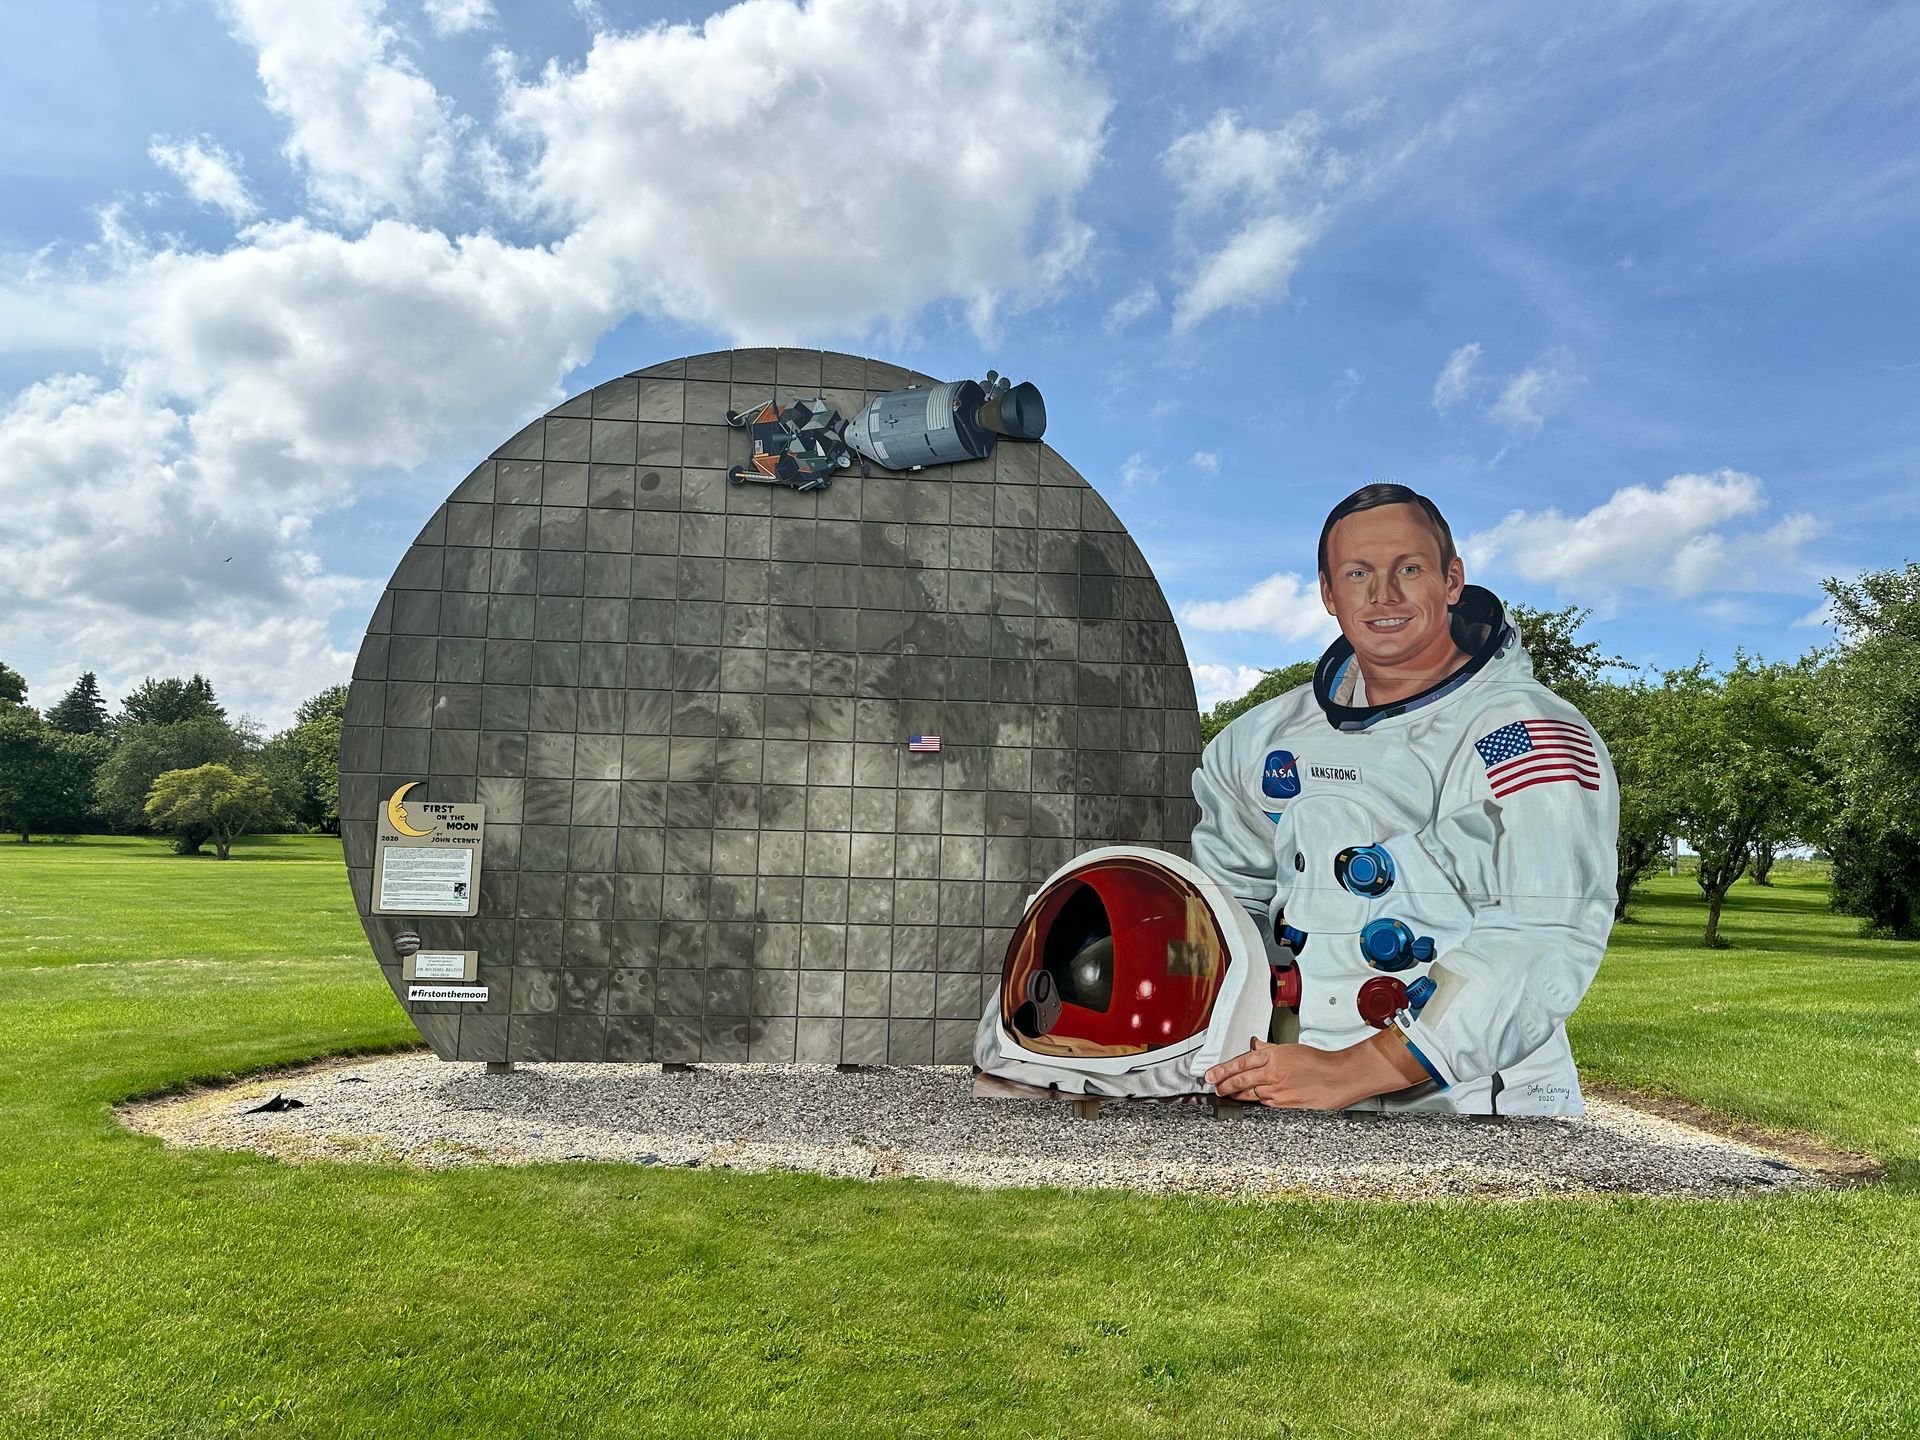 A mural of Neil Armstrong with the Moon in the background.